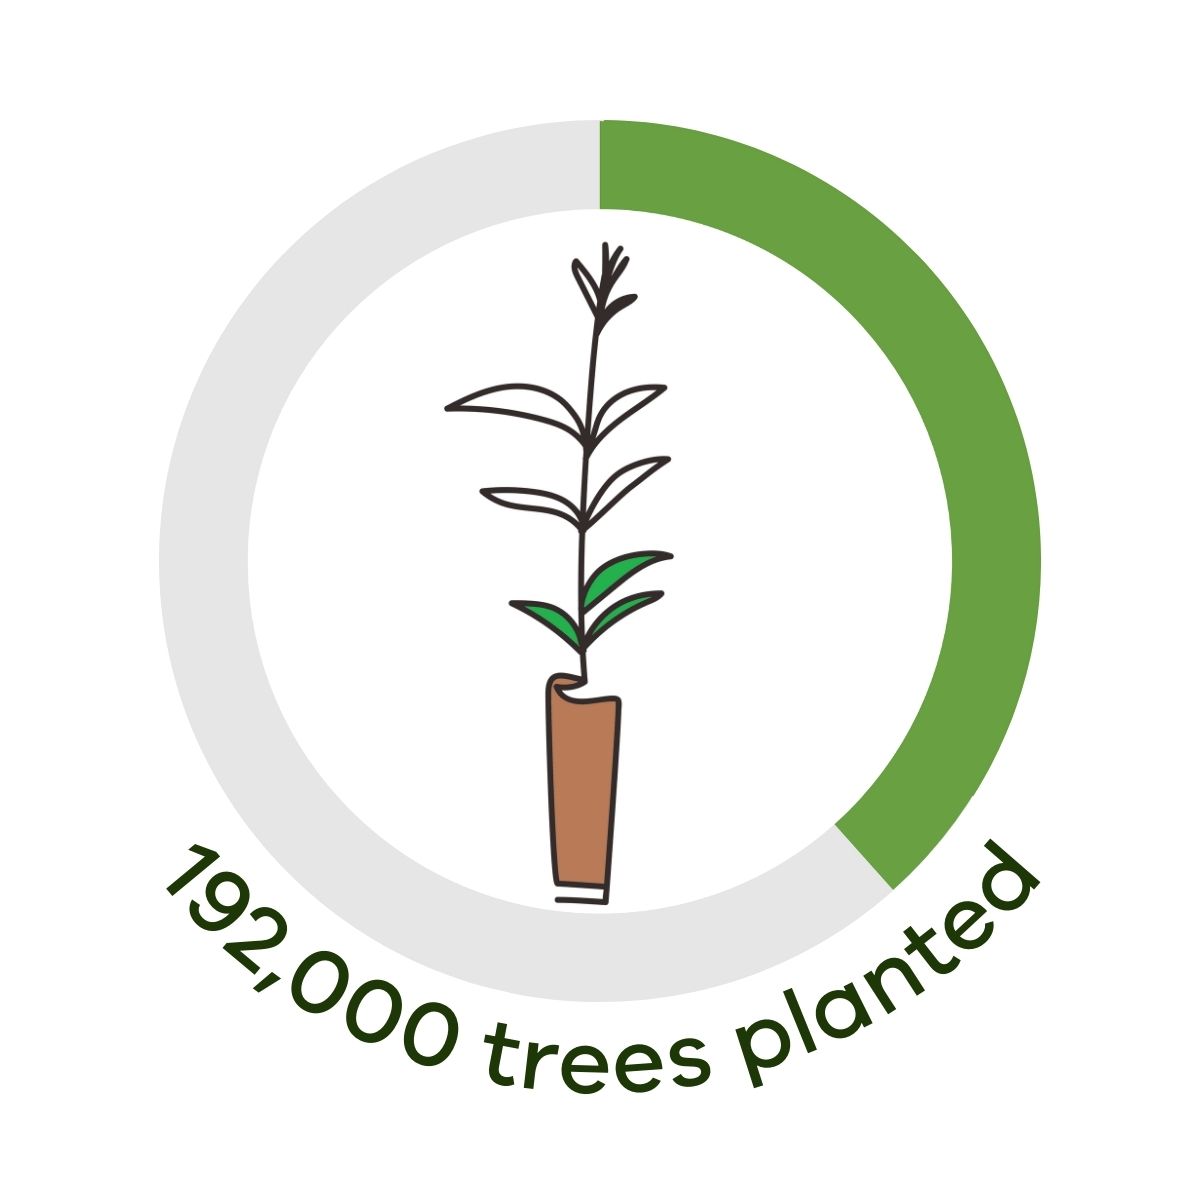 Graph displaying number of trees planted as part of the program. Graph shows progress of 192000 of the 500000 target